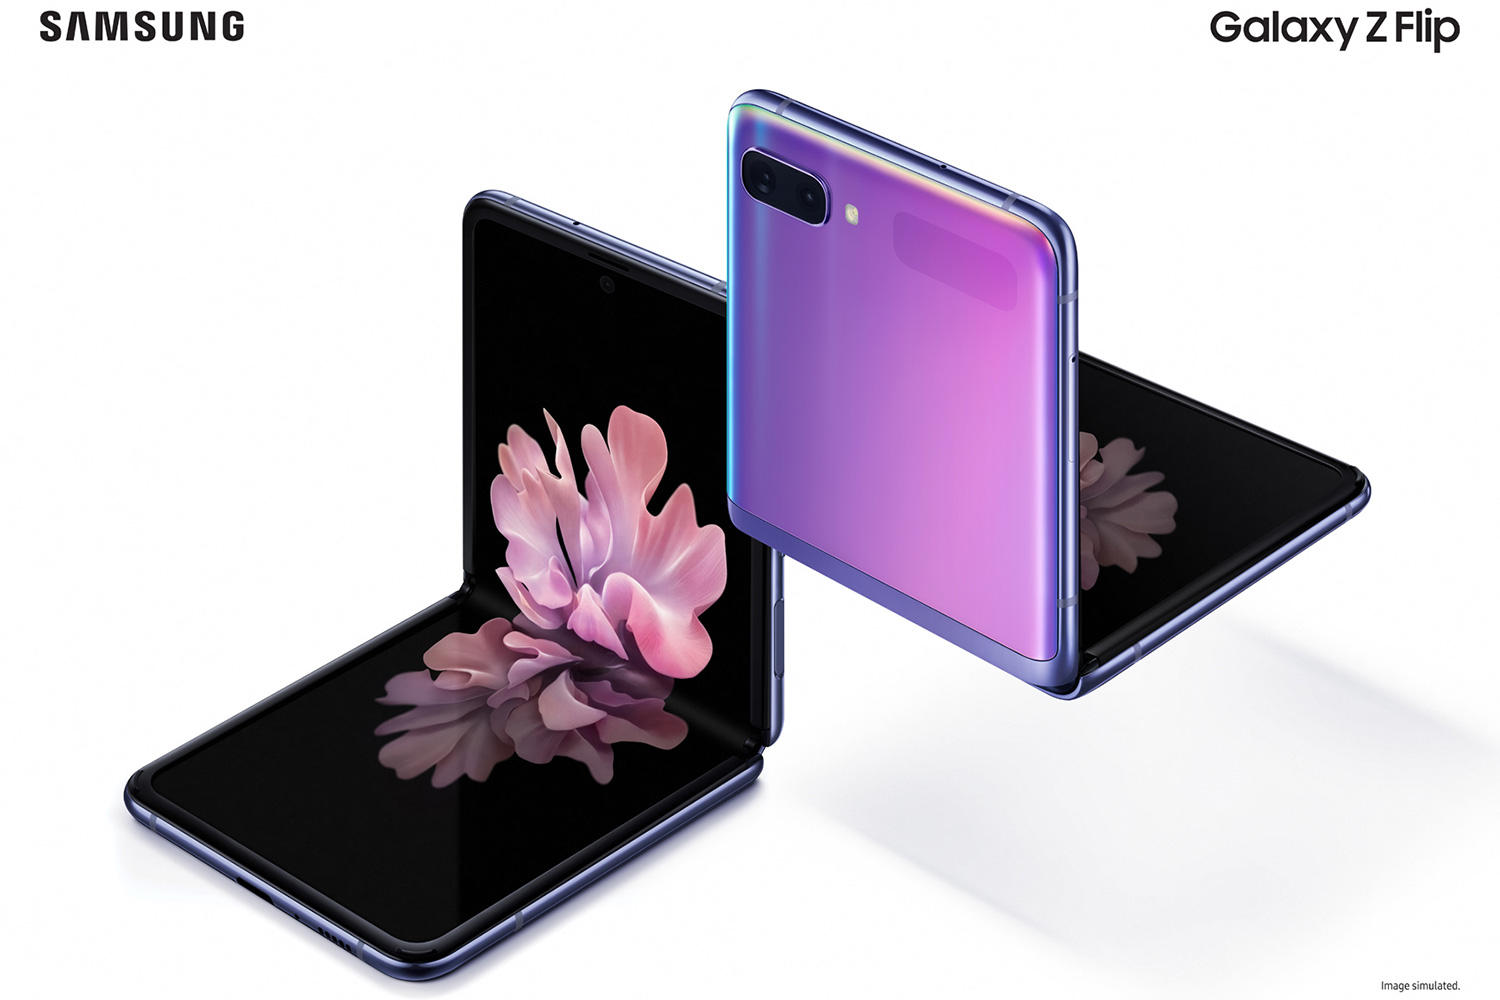 Samsung Galaxy Z Flip is the new foldable smartphone